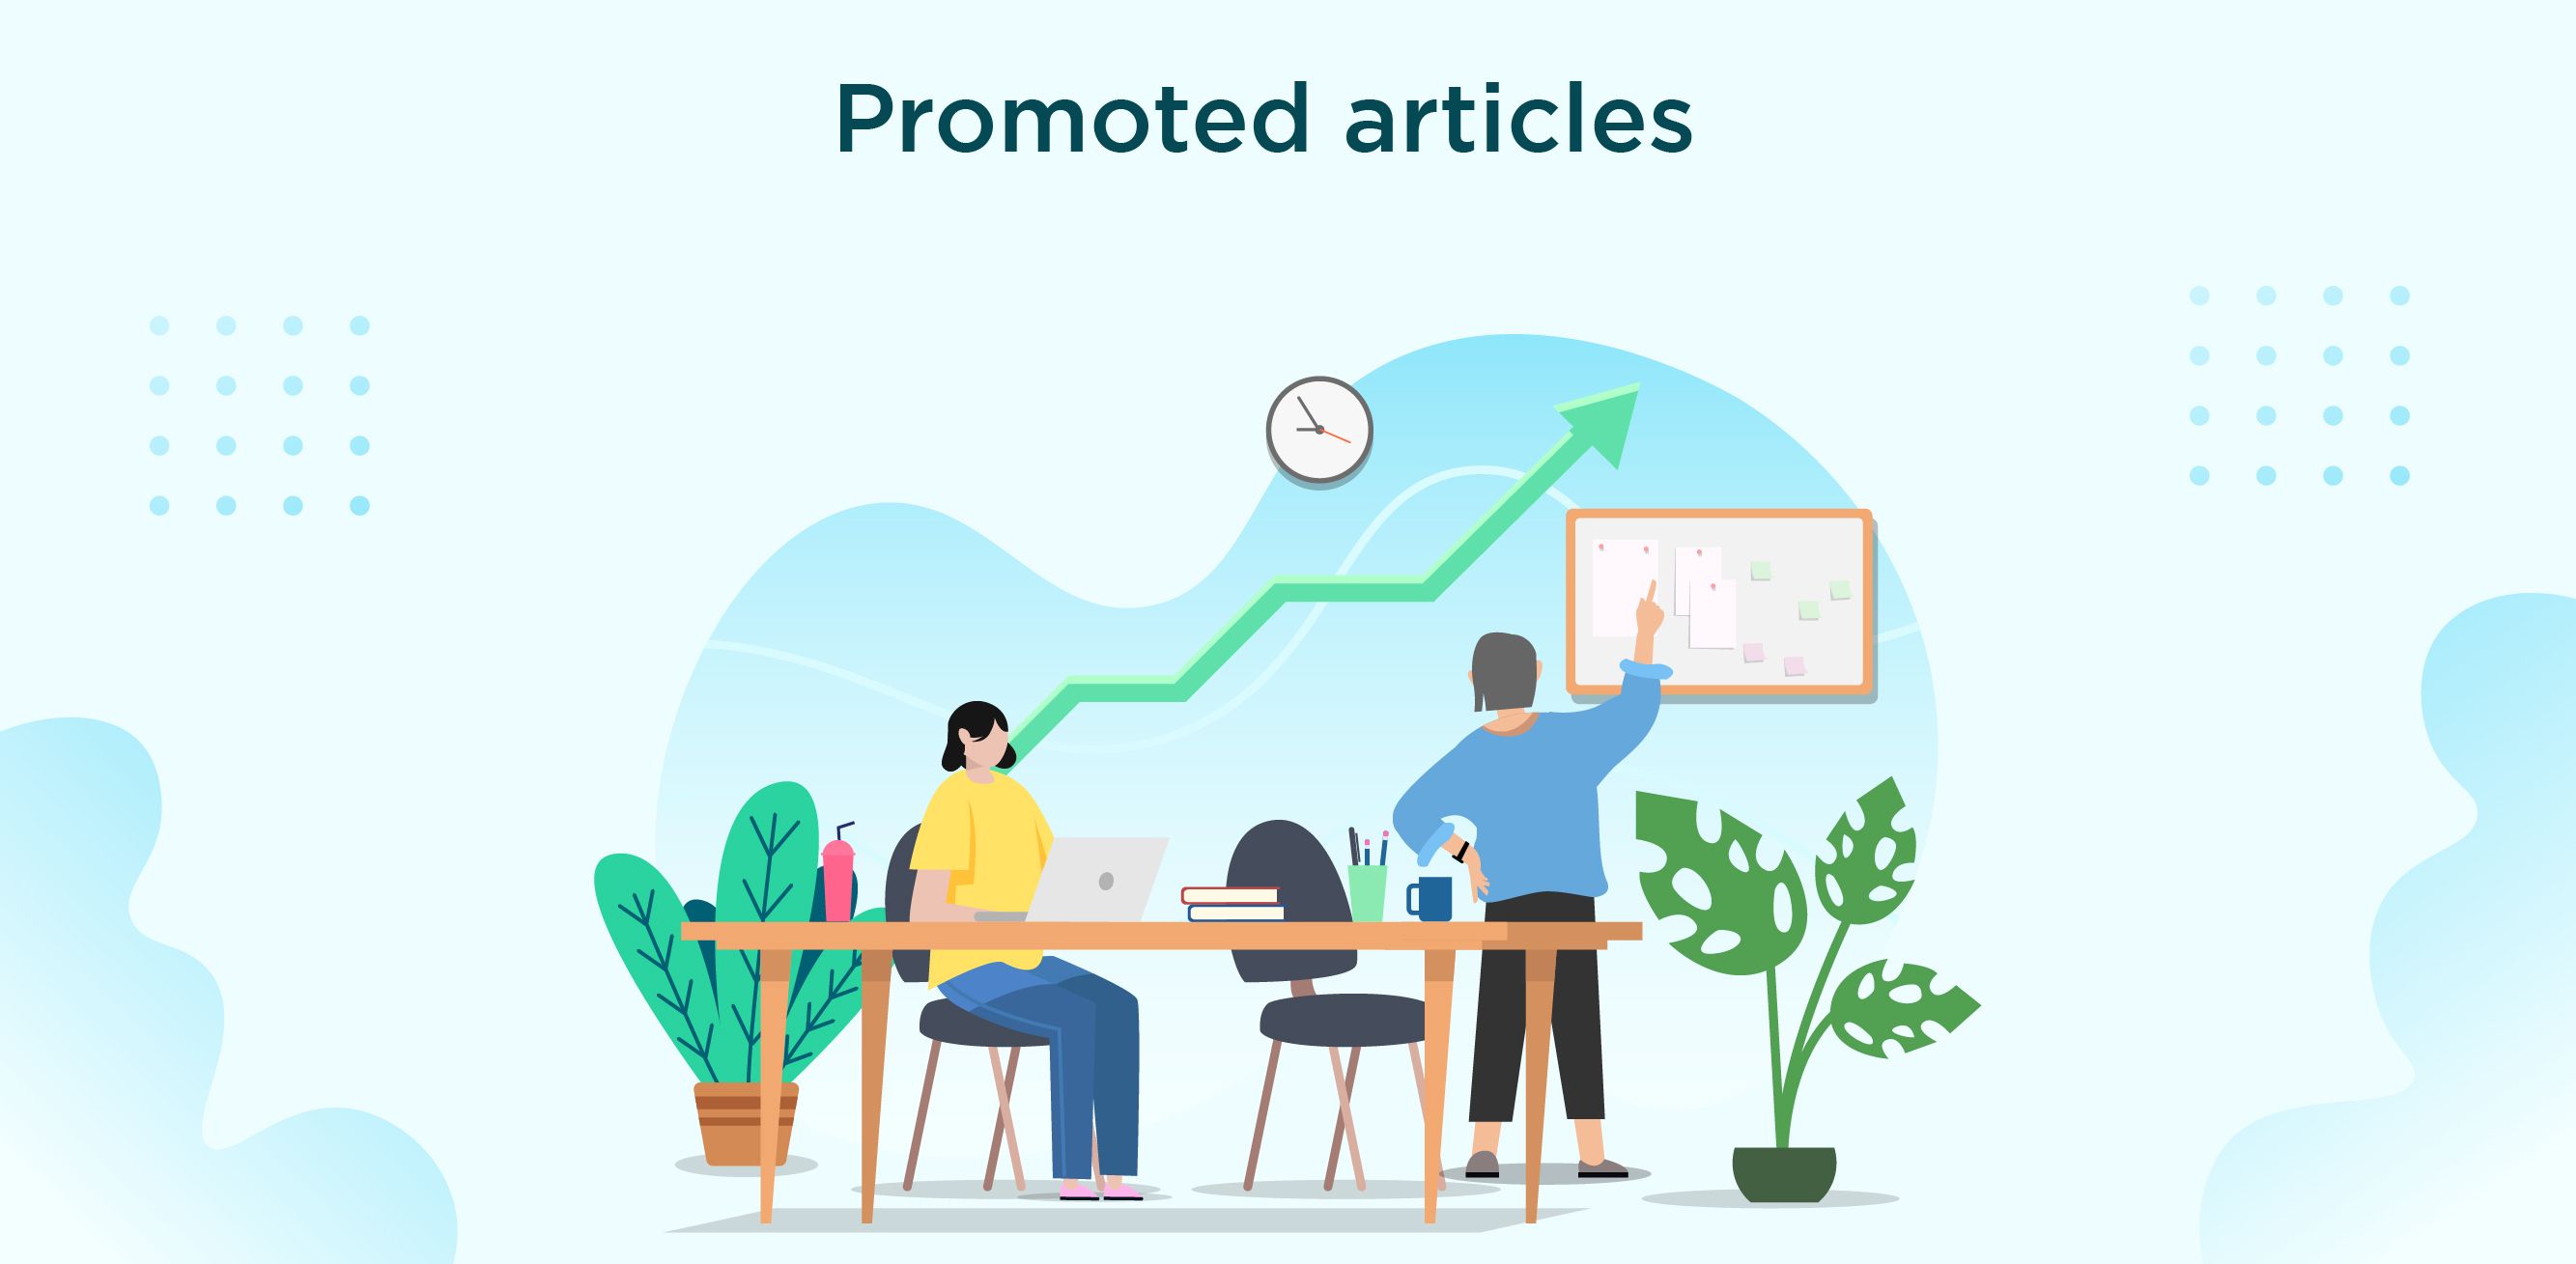 Promoted articles